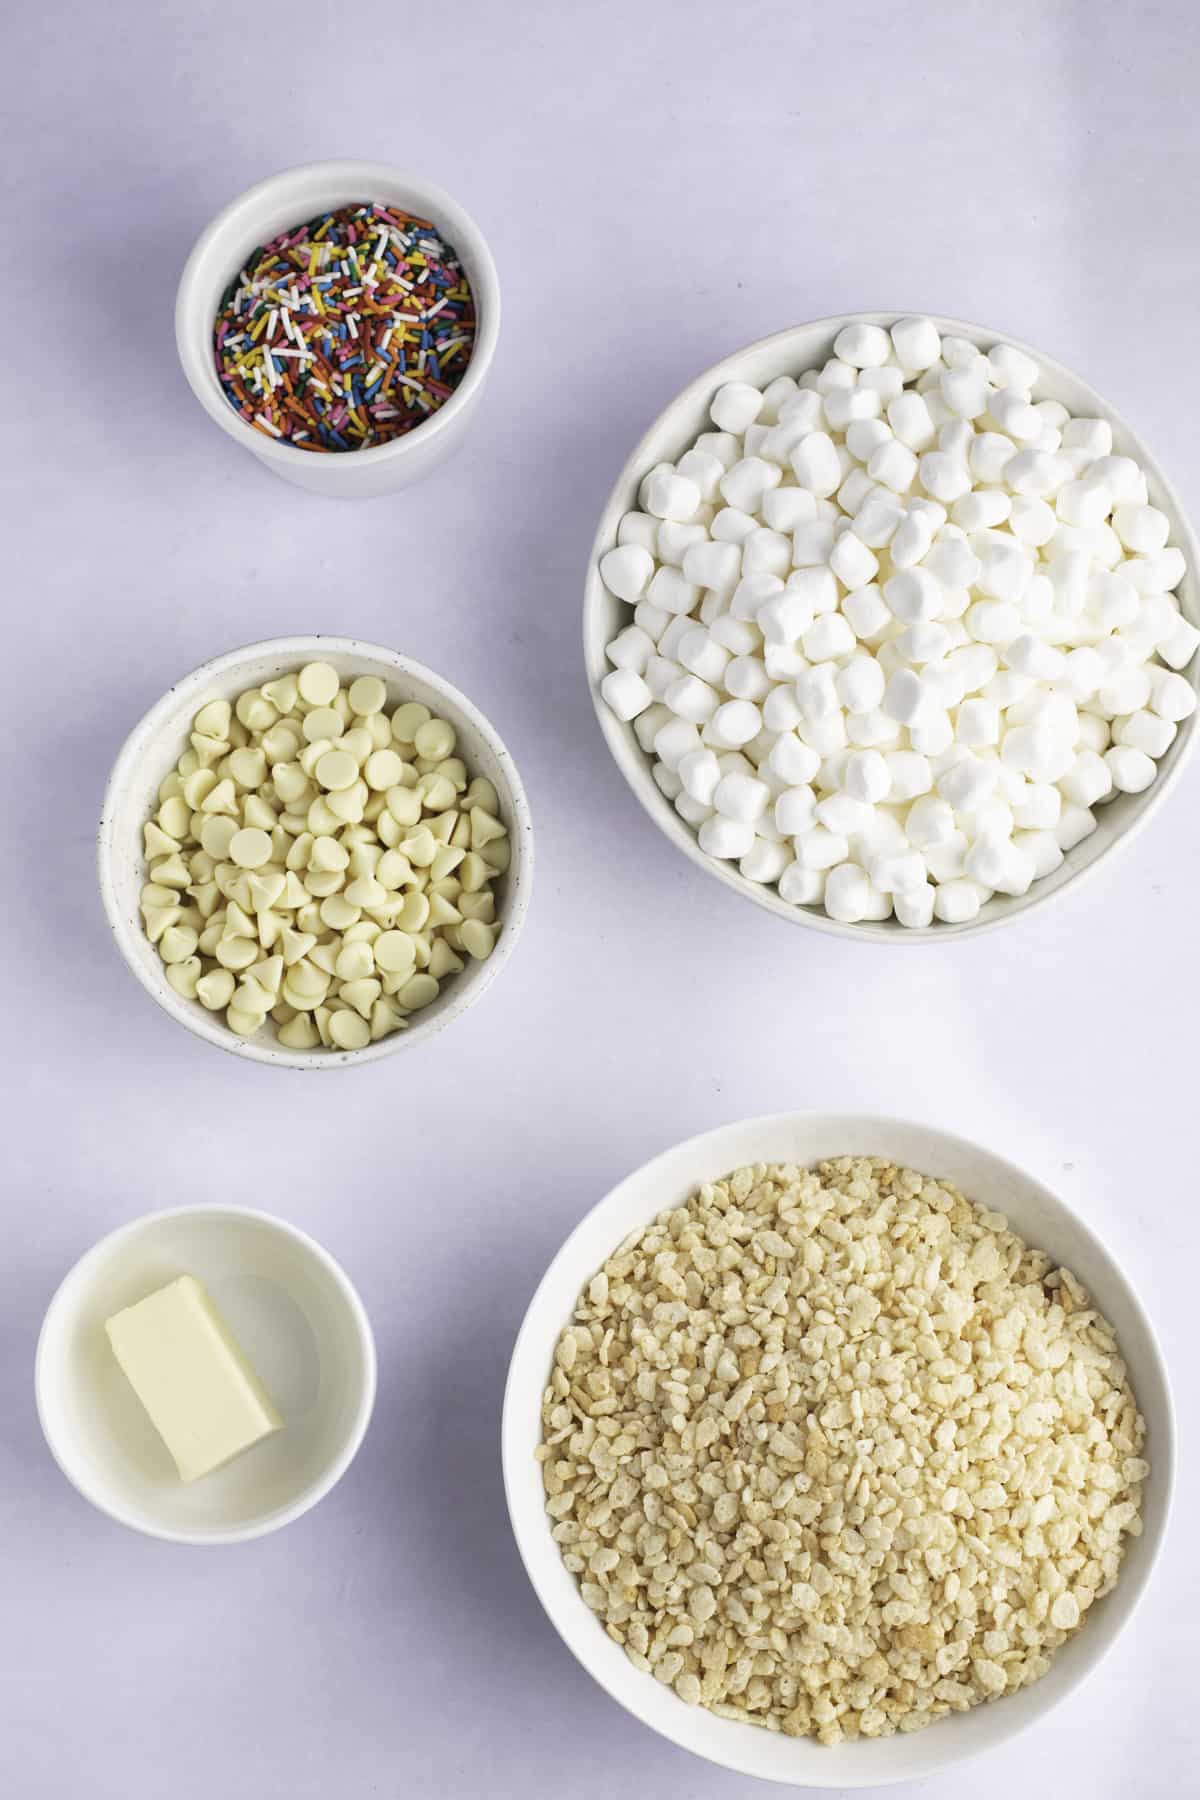 Ingredients for funfetti rice krispie treats in small bowls on a white surface